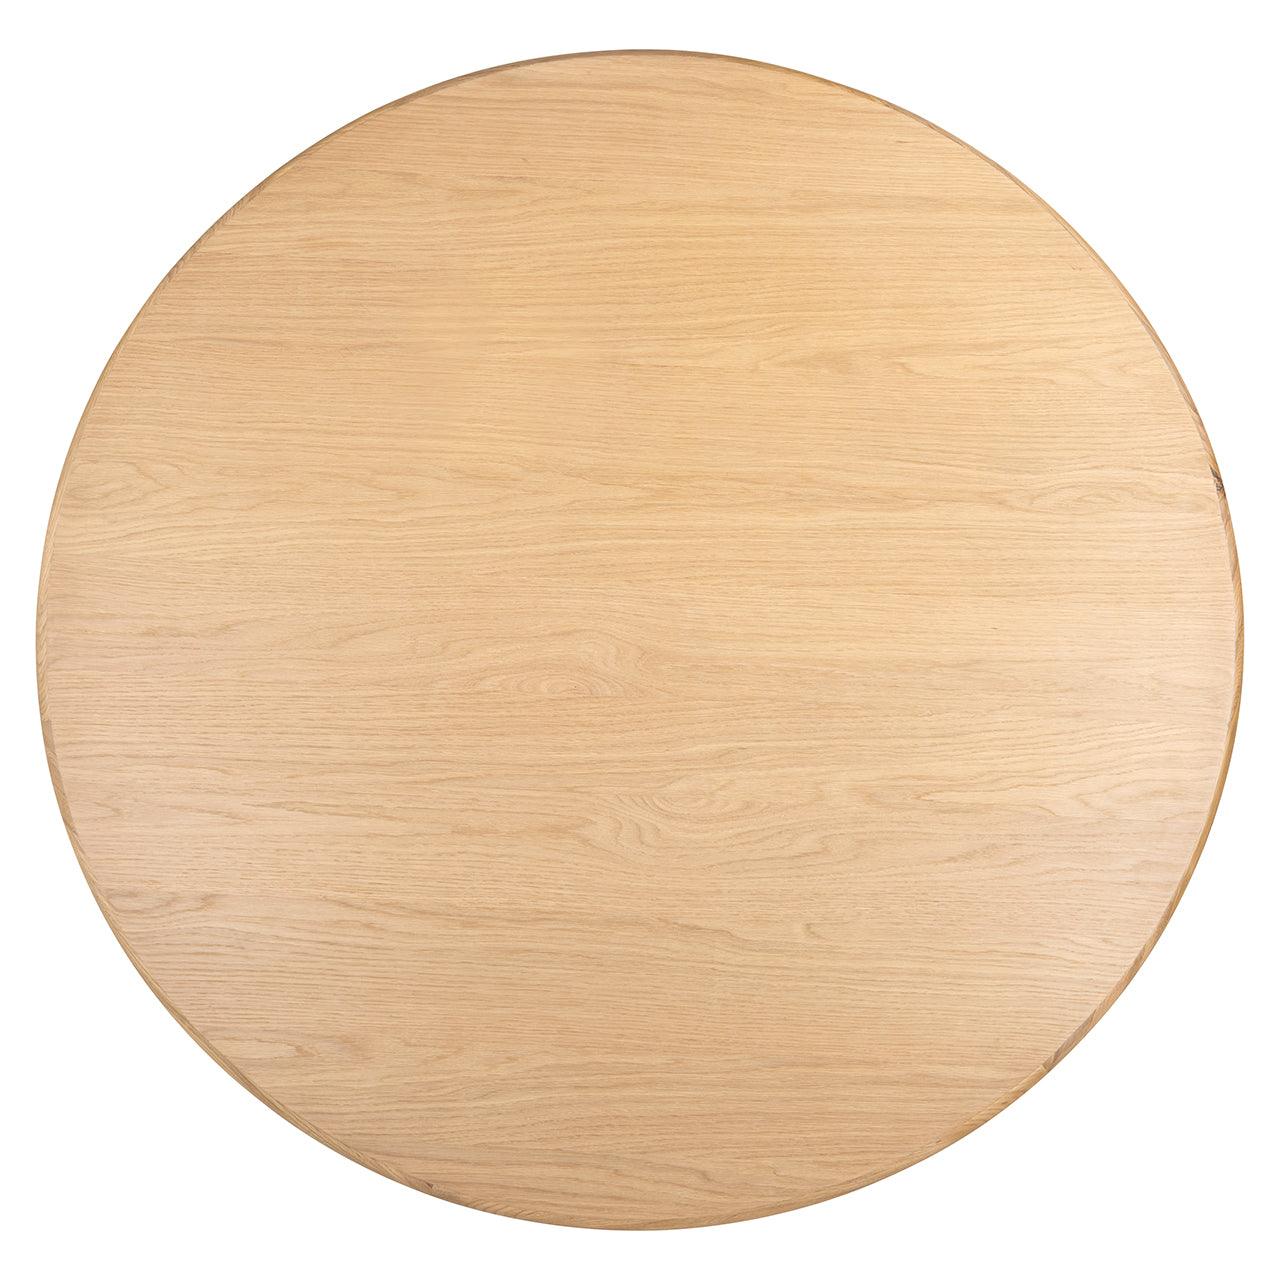 Oakley Natural Oak Wood Circular Dining Table by Richmond Interiors - Maison Rêves UK